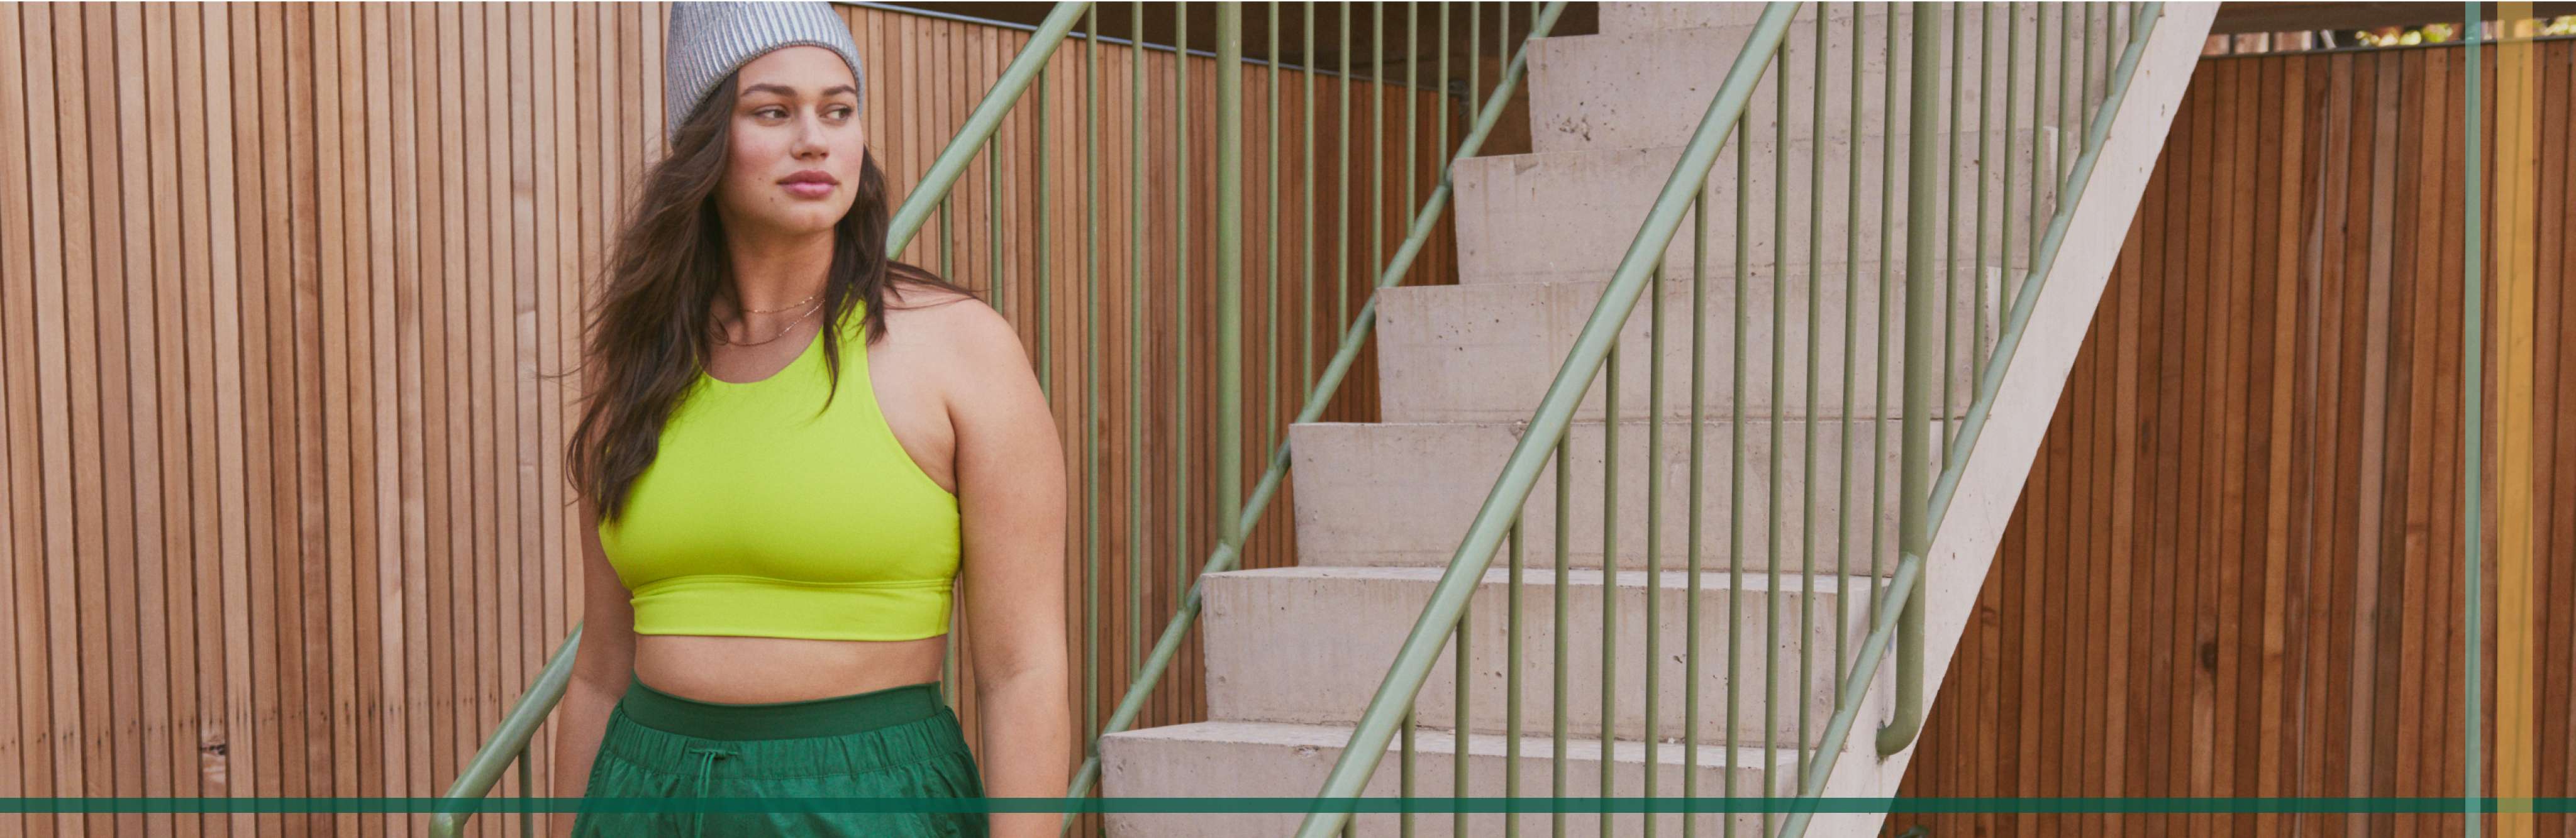 Model wearing neon green sports bra with green track pants and beanie